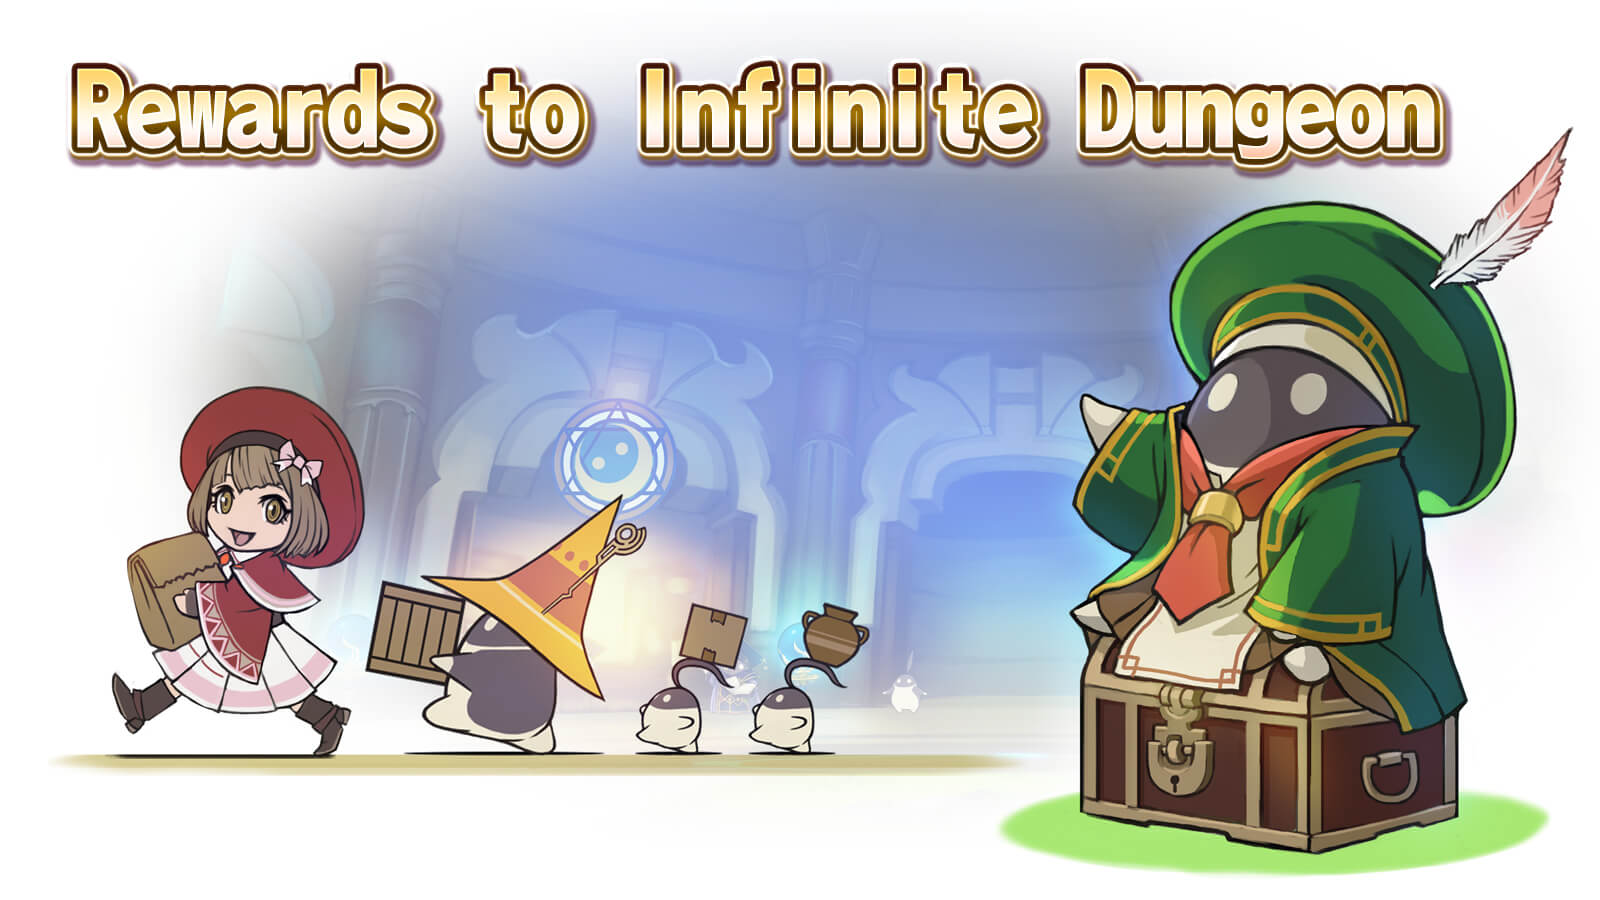 Floor Completion Rewards for the Infinite Dungeon "Infinite Tremor" Available!